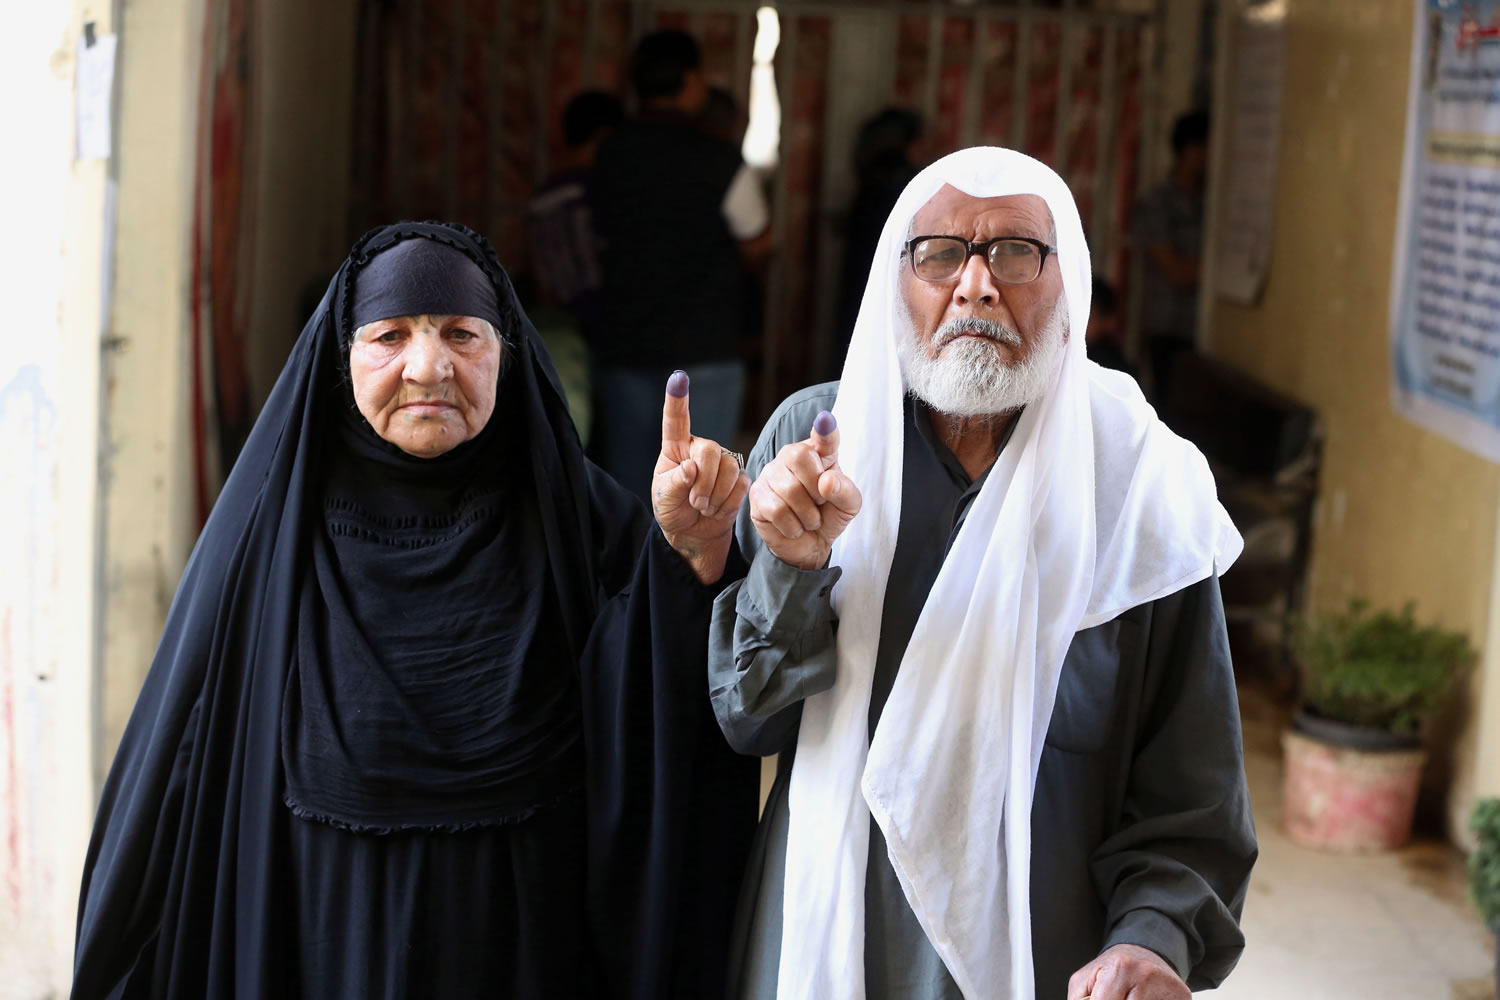 A man and his wife show their inked fingers after casting their votes Wednesday at a polling station in Baghdad, Iraq.